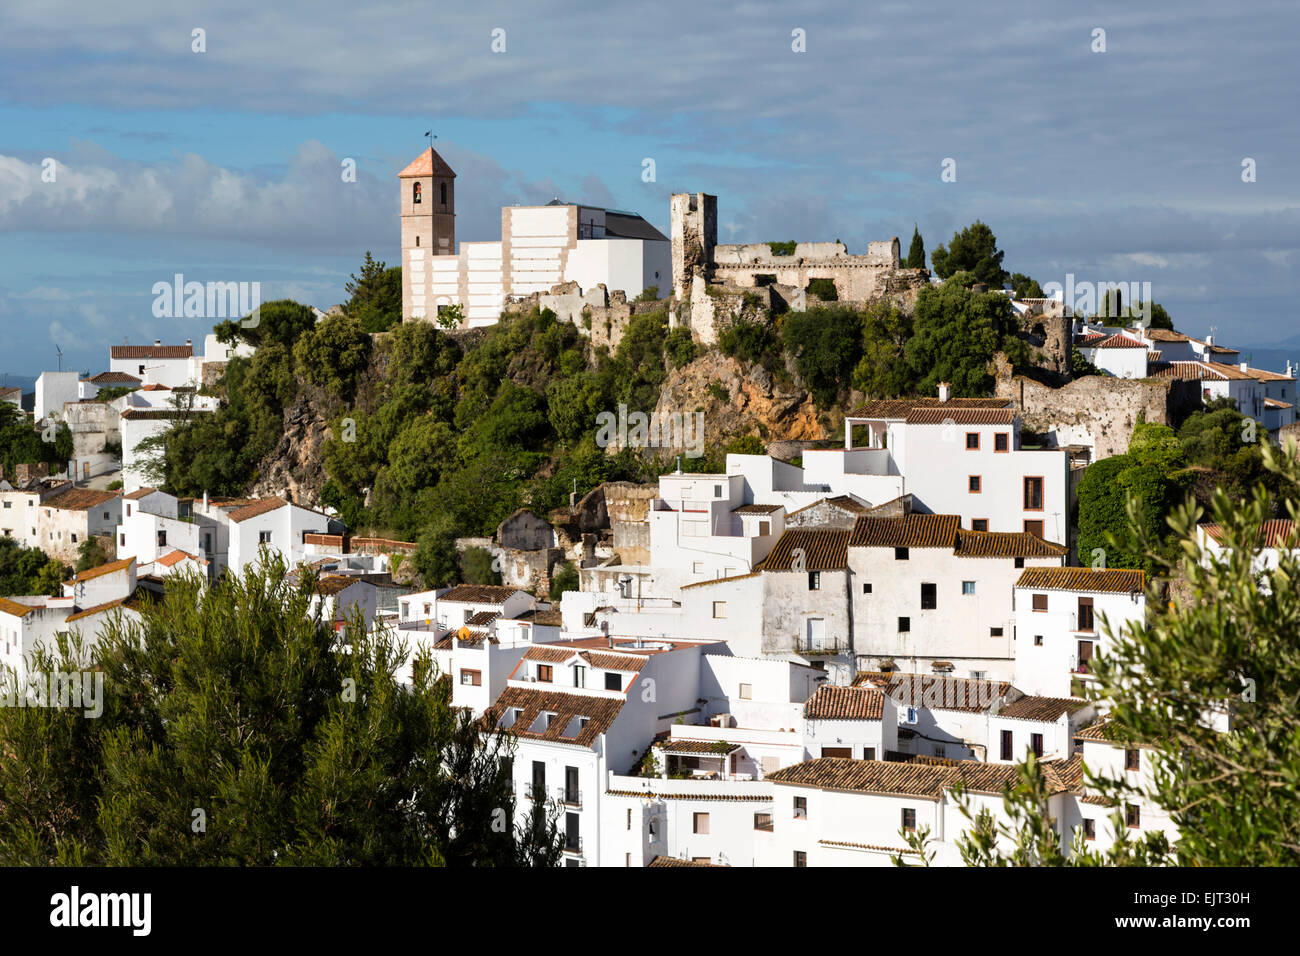 Casares, Malaga Province, Andalusia, southern Spain.  Typical whitewashed mountain town Stock Photo